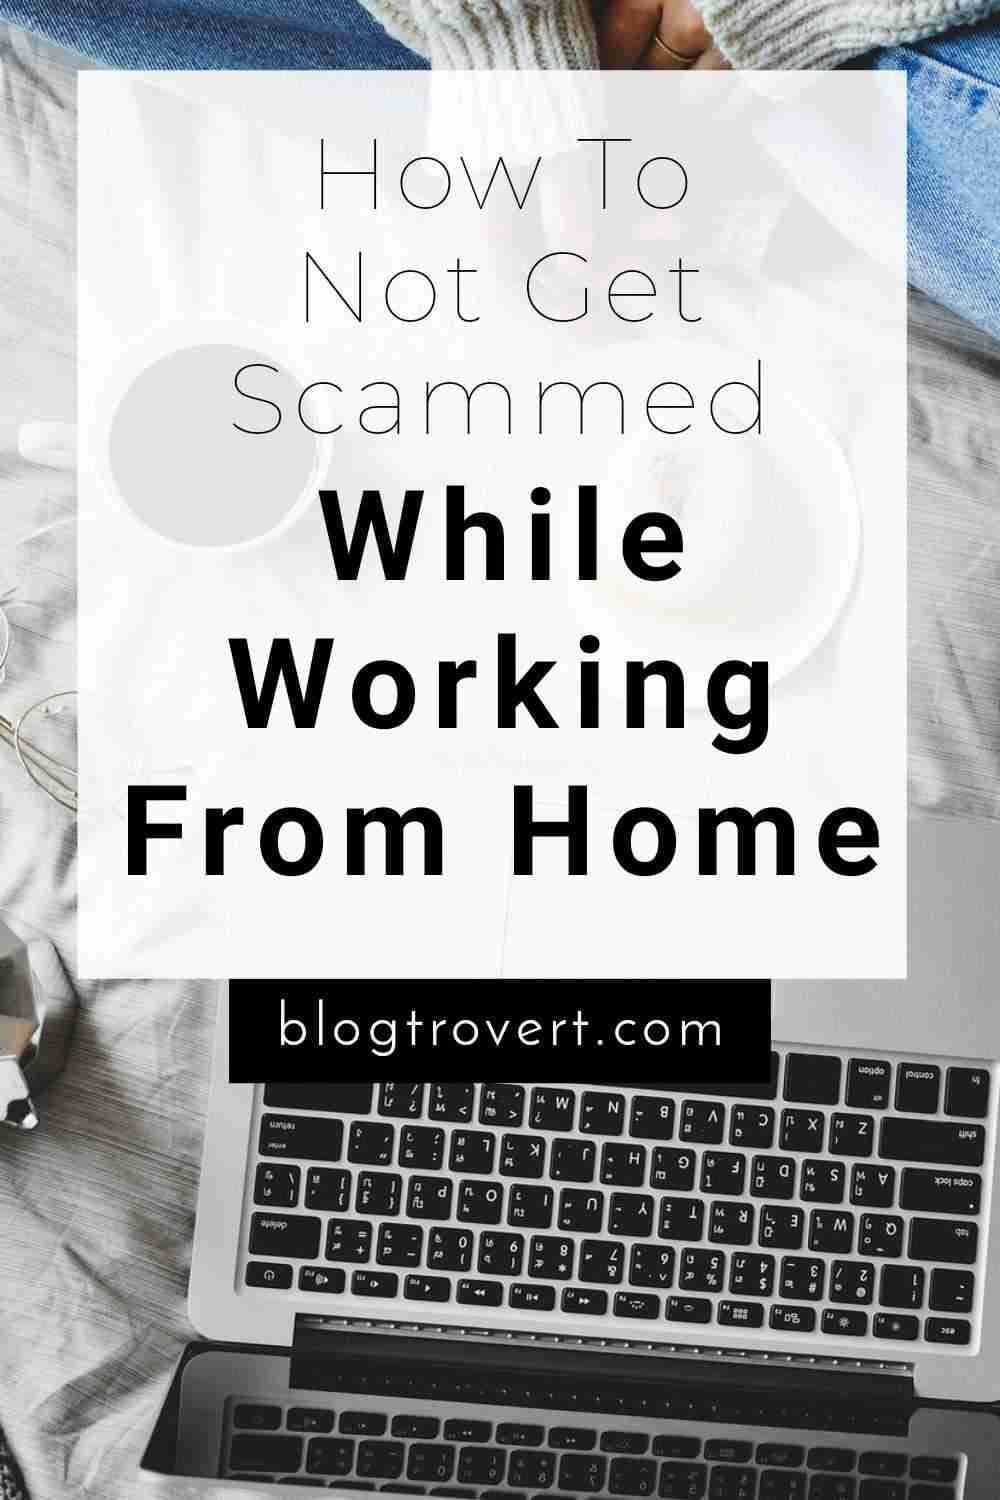 How To Spot Work From Home Job Scams When Looking For real Jobs 2